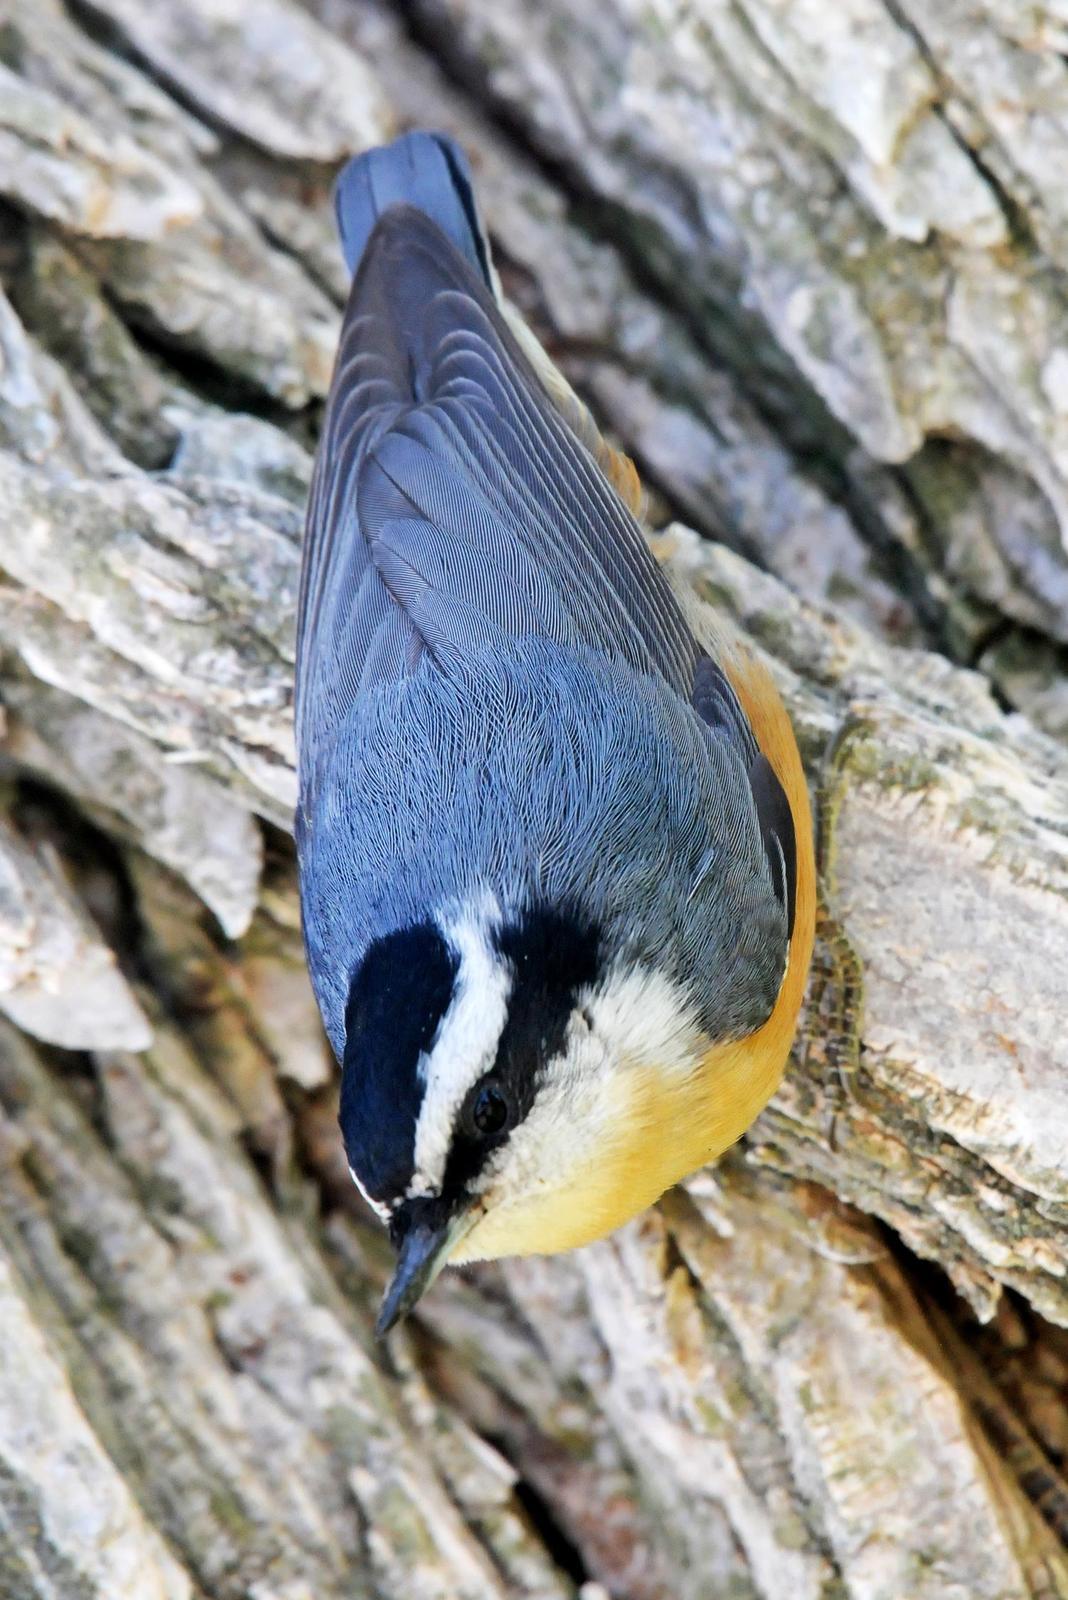 Red-breasted Nuthatch Photo by Steven Mlodinow